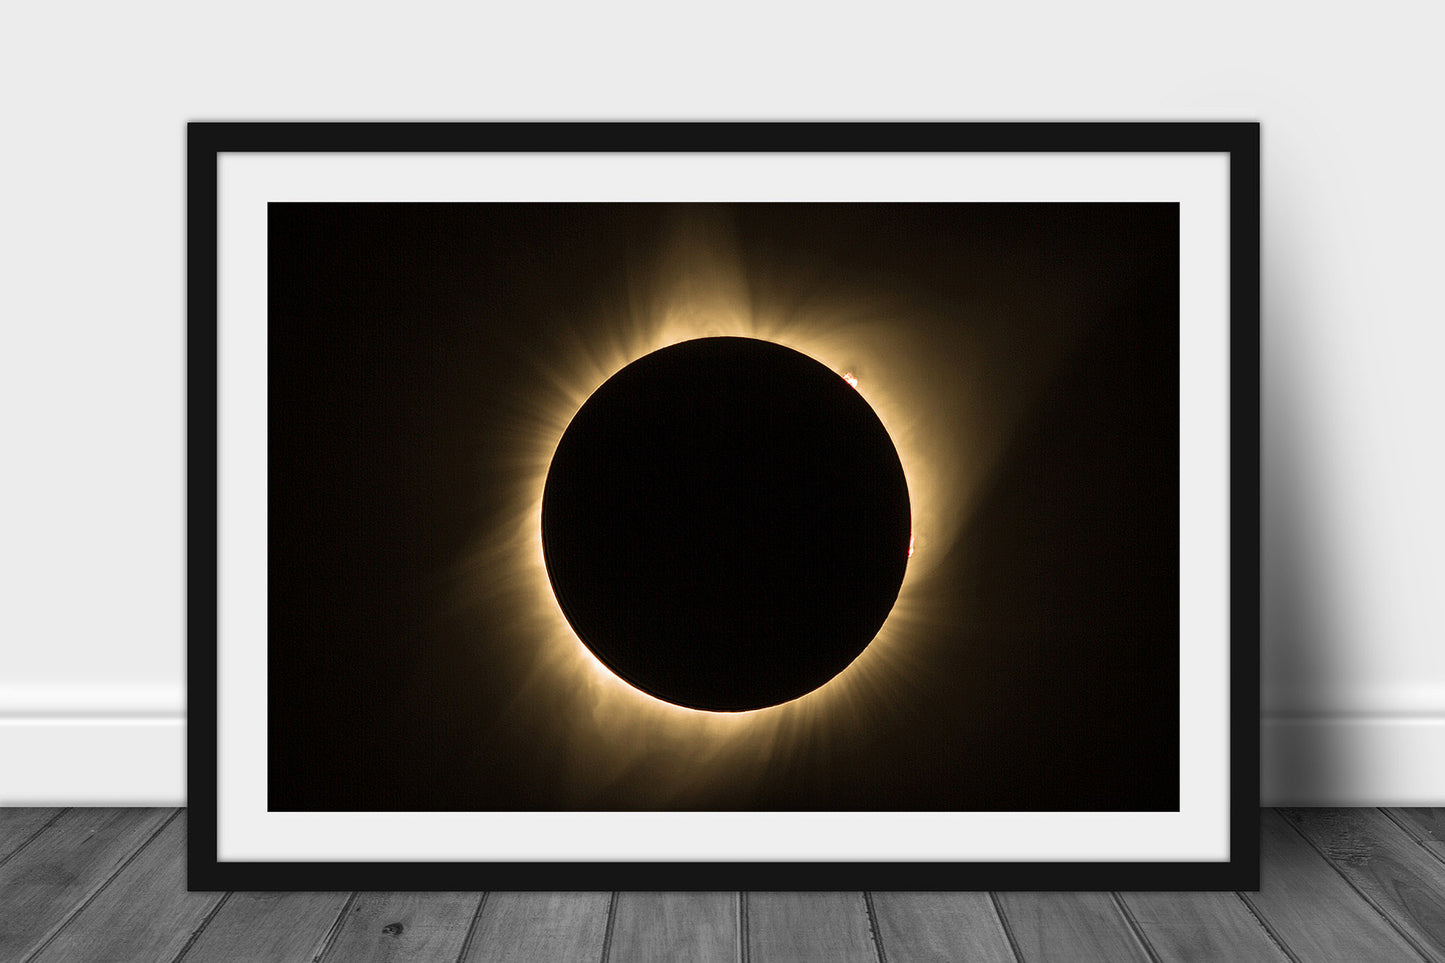 Framed and matted celestial print of a total solar eclipse at totality with visible sun flares captured in Nebraska by Sean Ramsey of Southern Plains Photography.